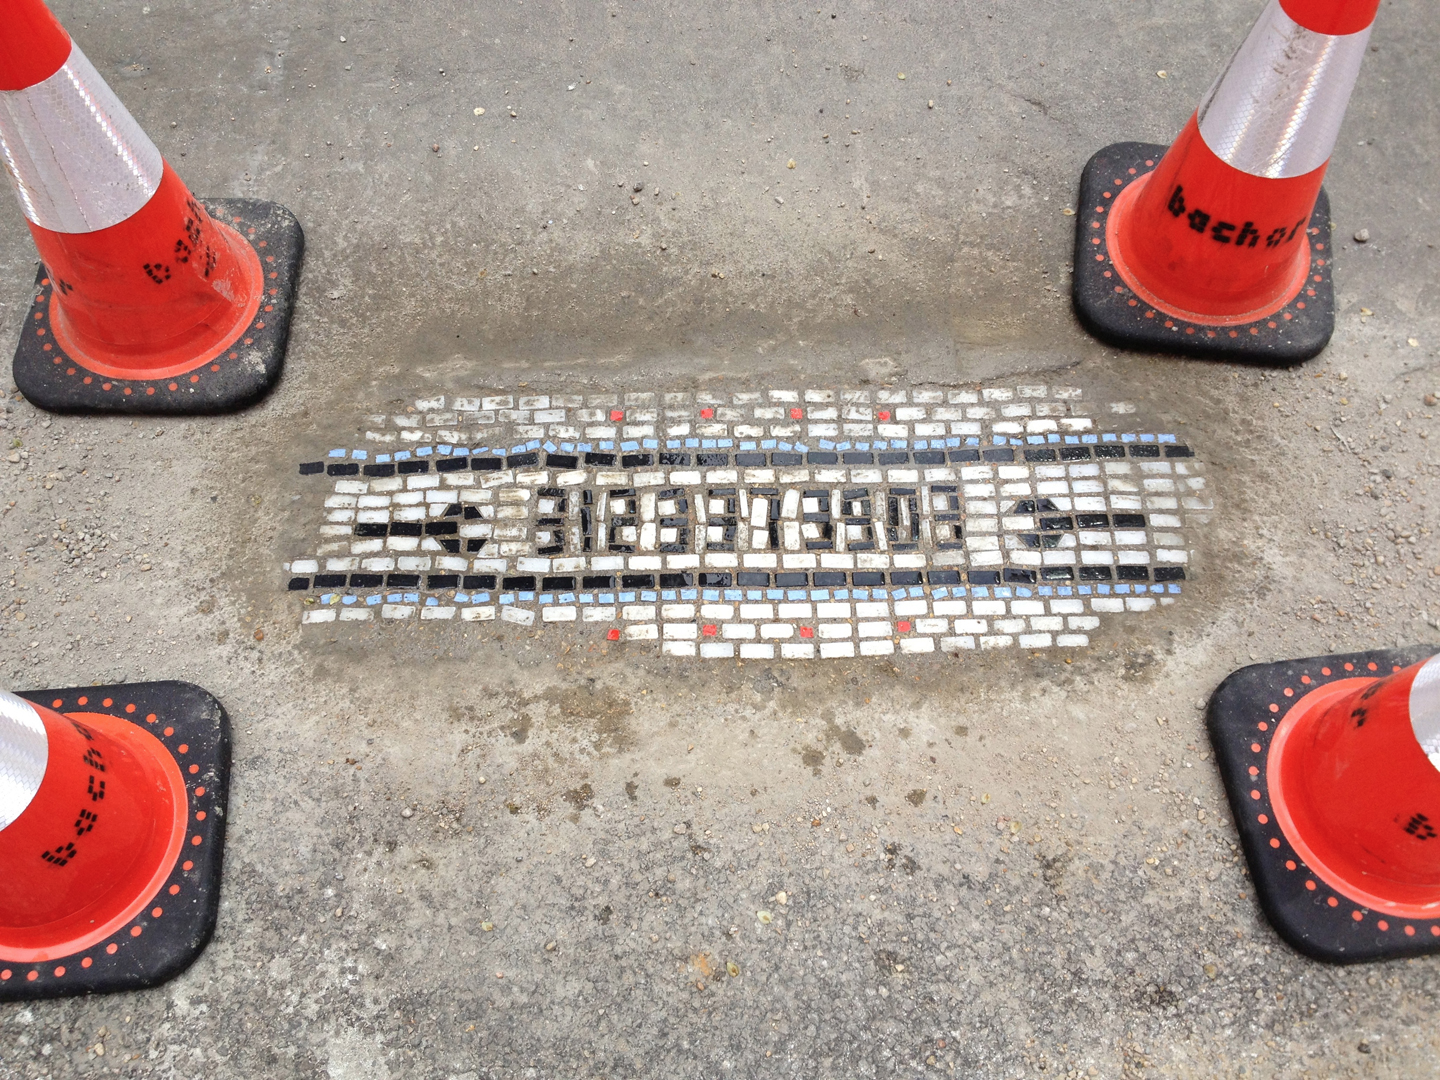 There’s A Joker Repairing Horrible Potholes With Mosaics